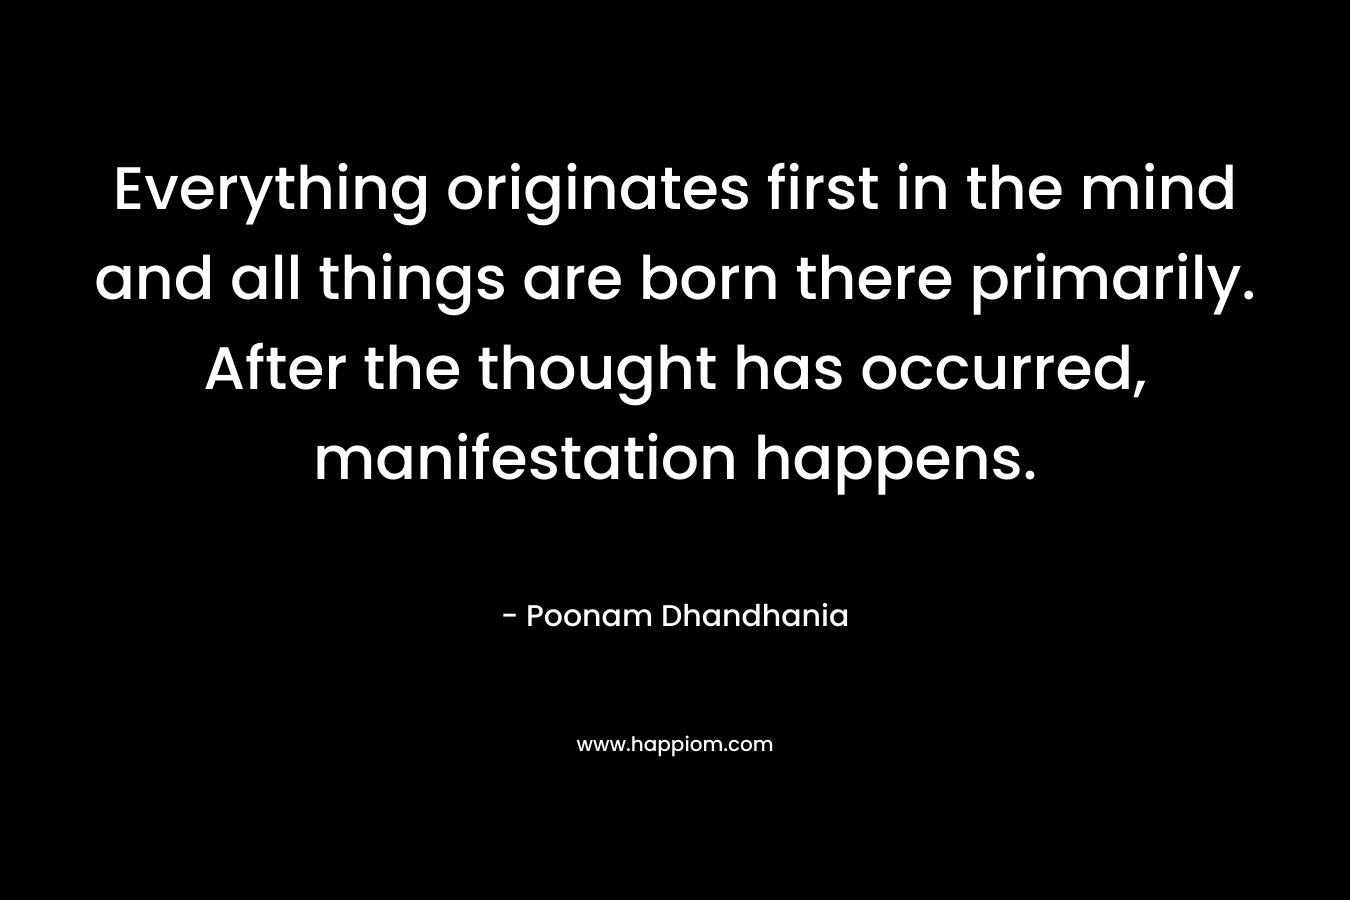 Everything originates first in the mind and all things are born there primarily. After the thought has occurred, manifestation happens. – Poonam Dhandhania